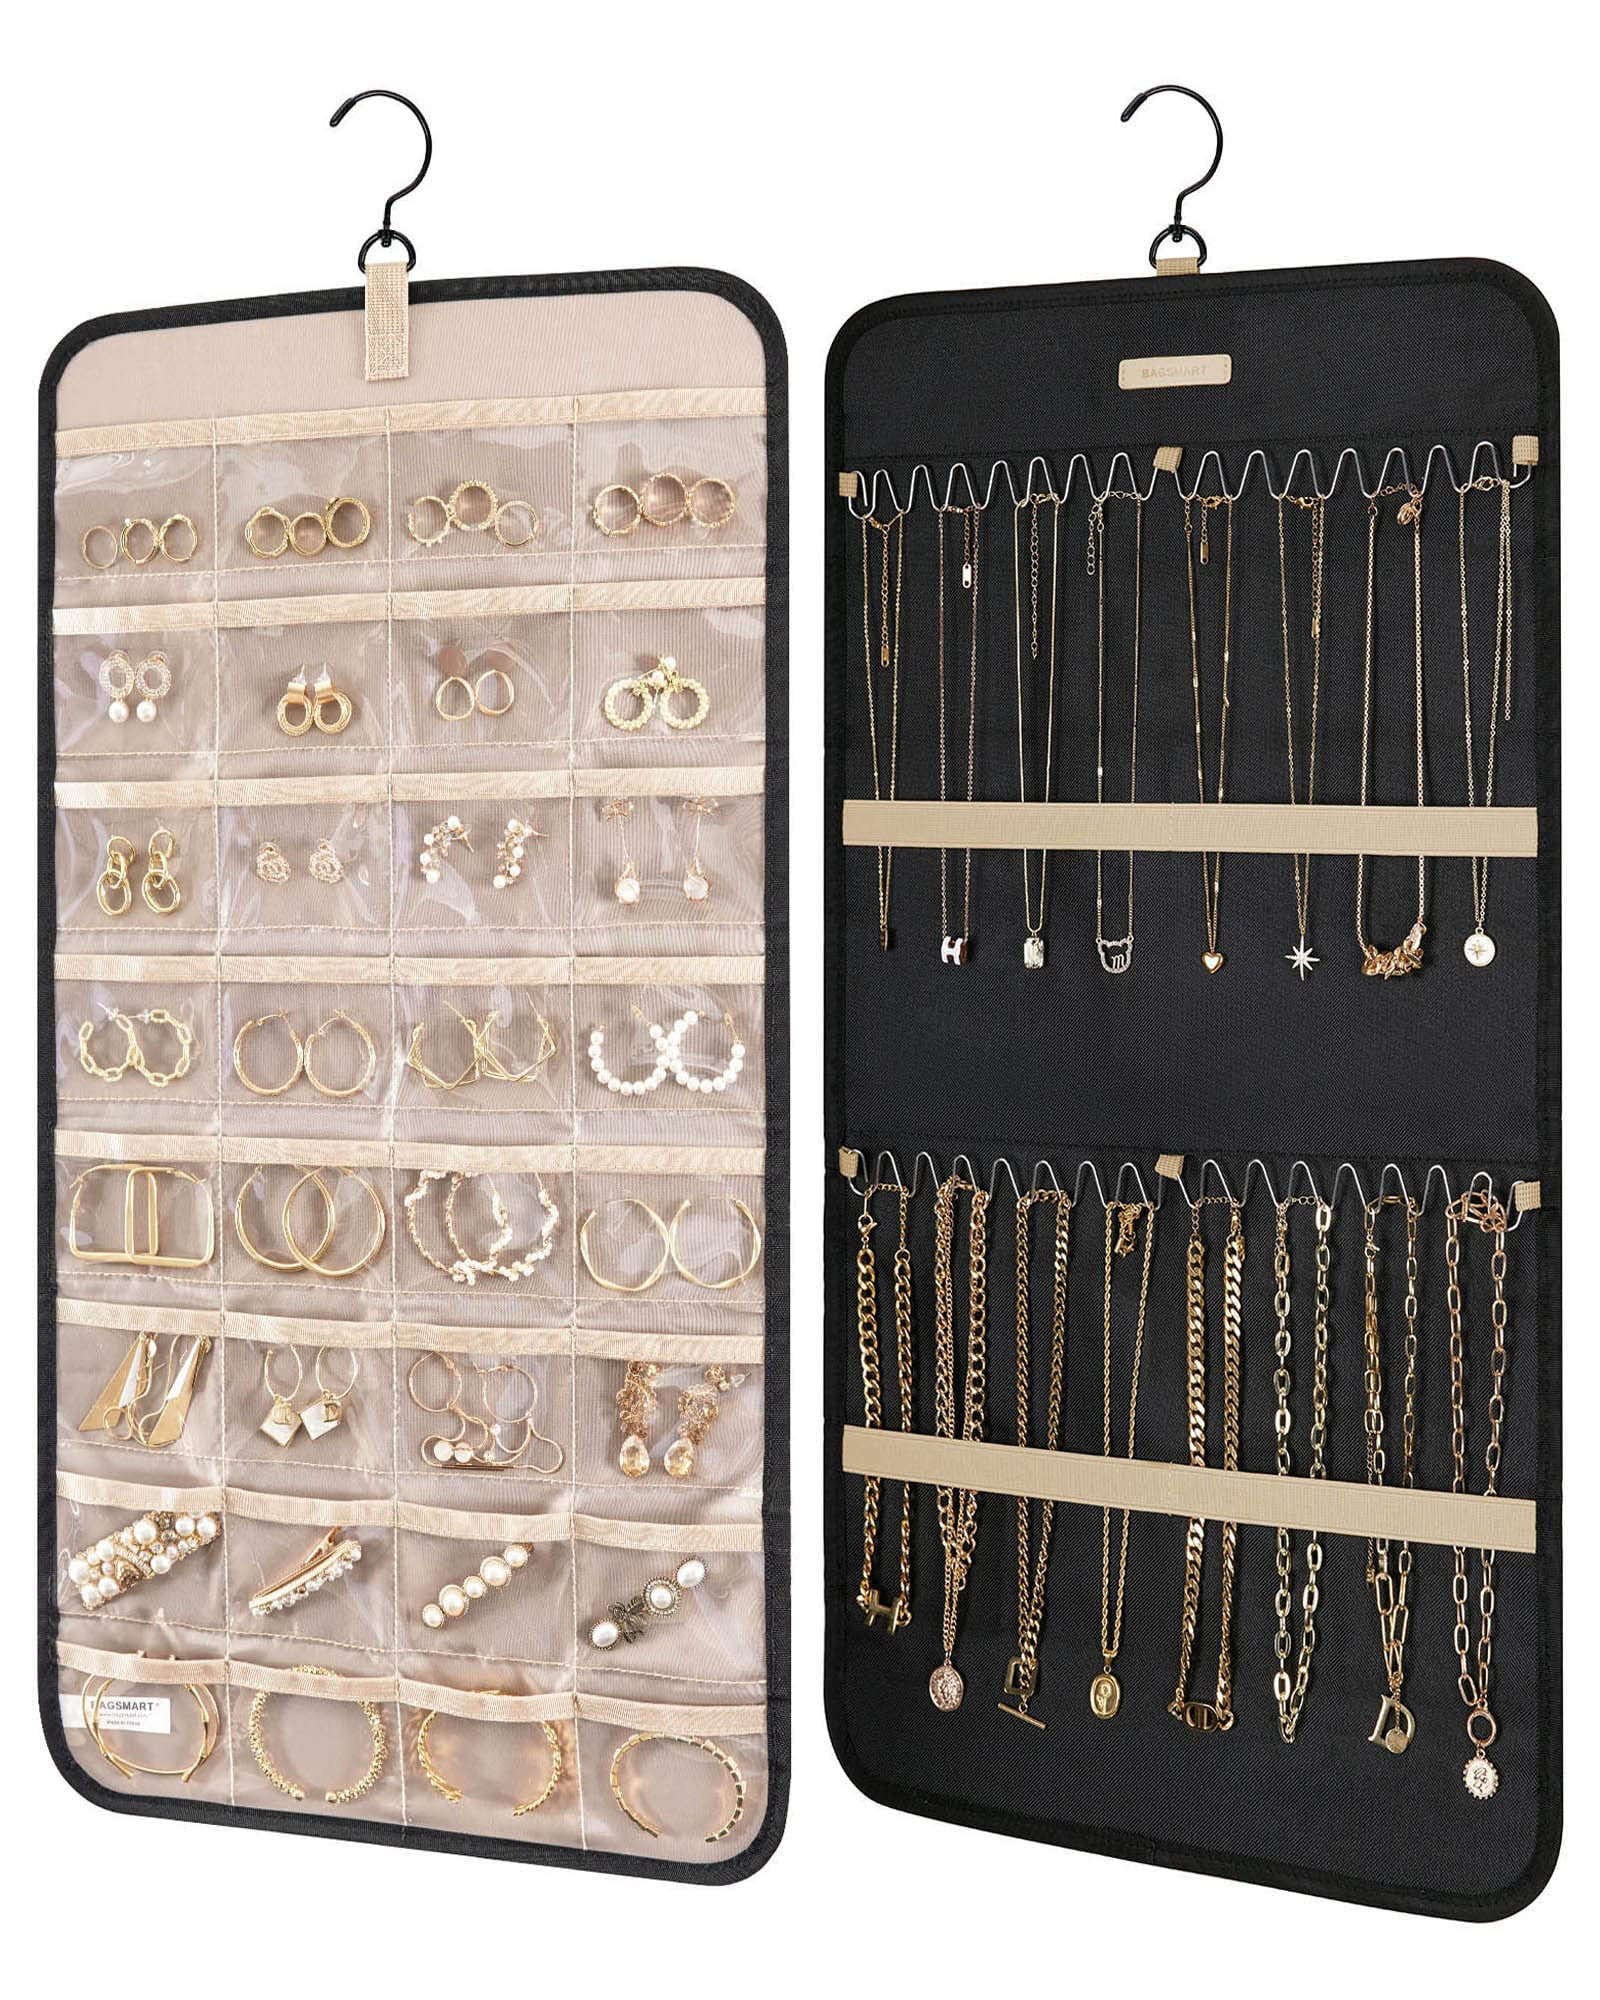 Foldable Jewelry Storage Display Bag for Earrings Chains Necklaces Jucoan 2 Pack Hanging Jewelry Organizer Double Sided Hanging Organizer with 80 Pockets and 40 Magic Tape Hooks 